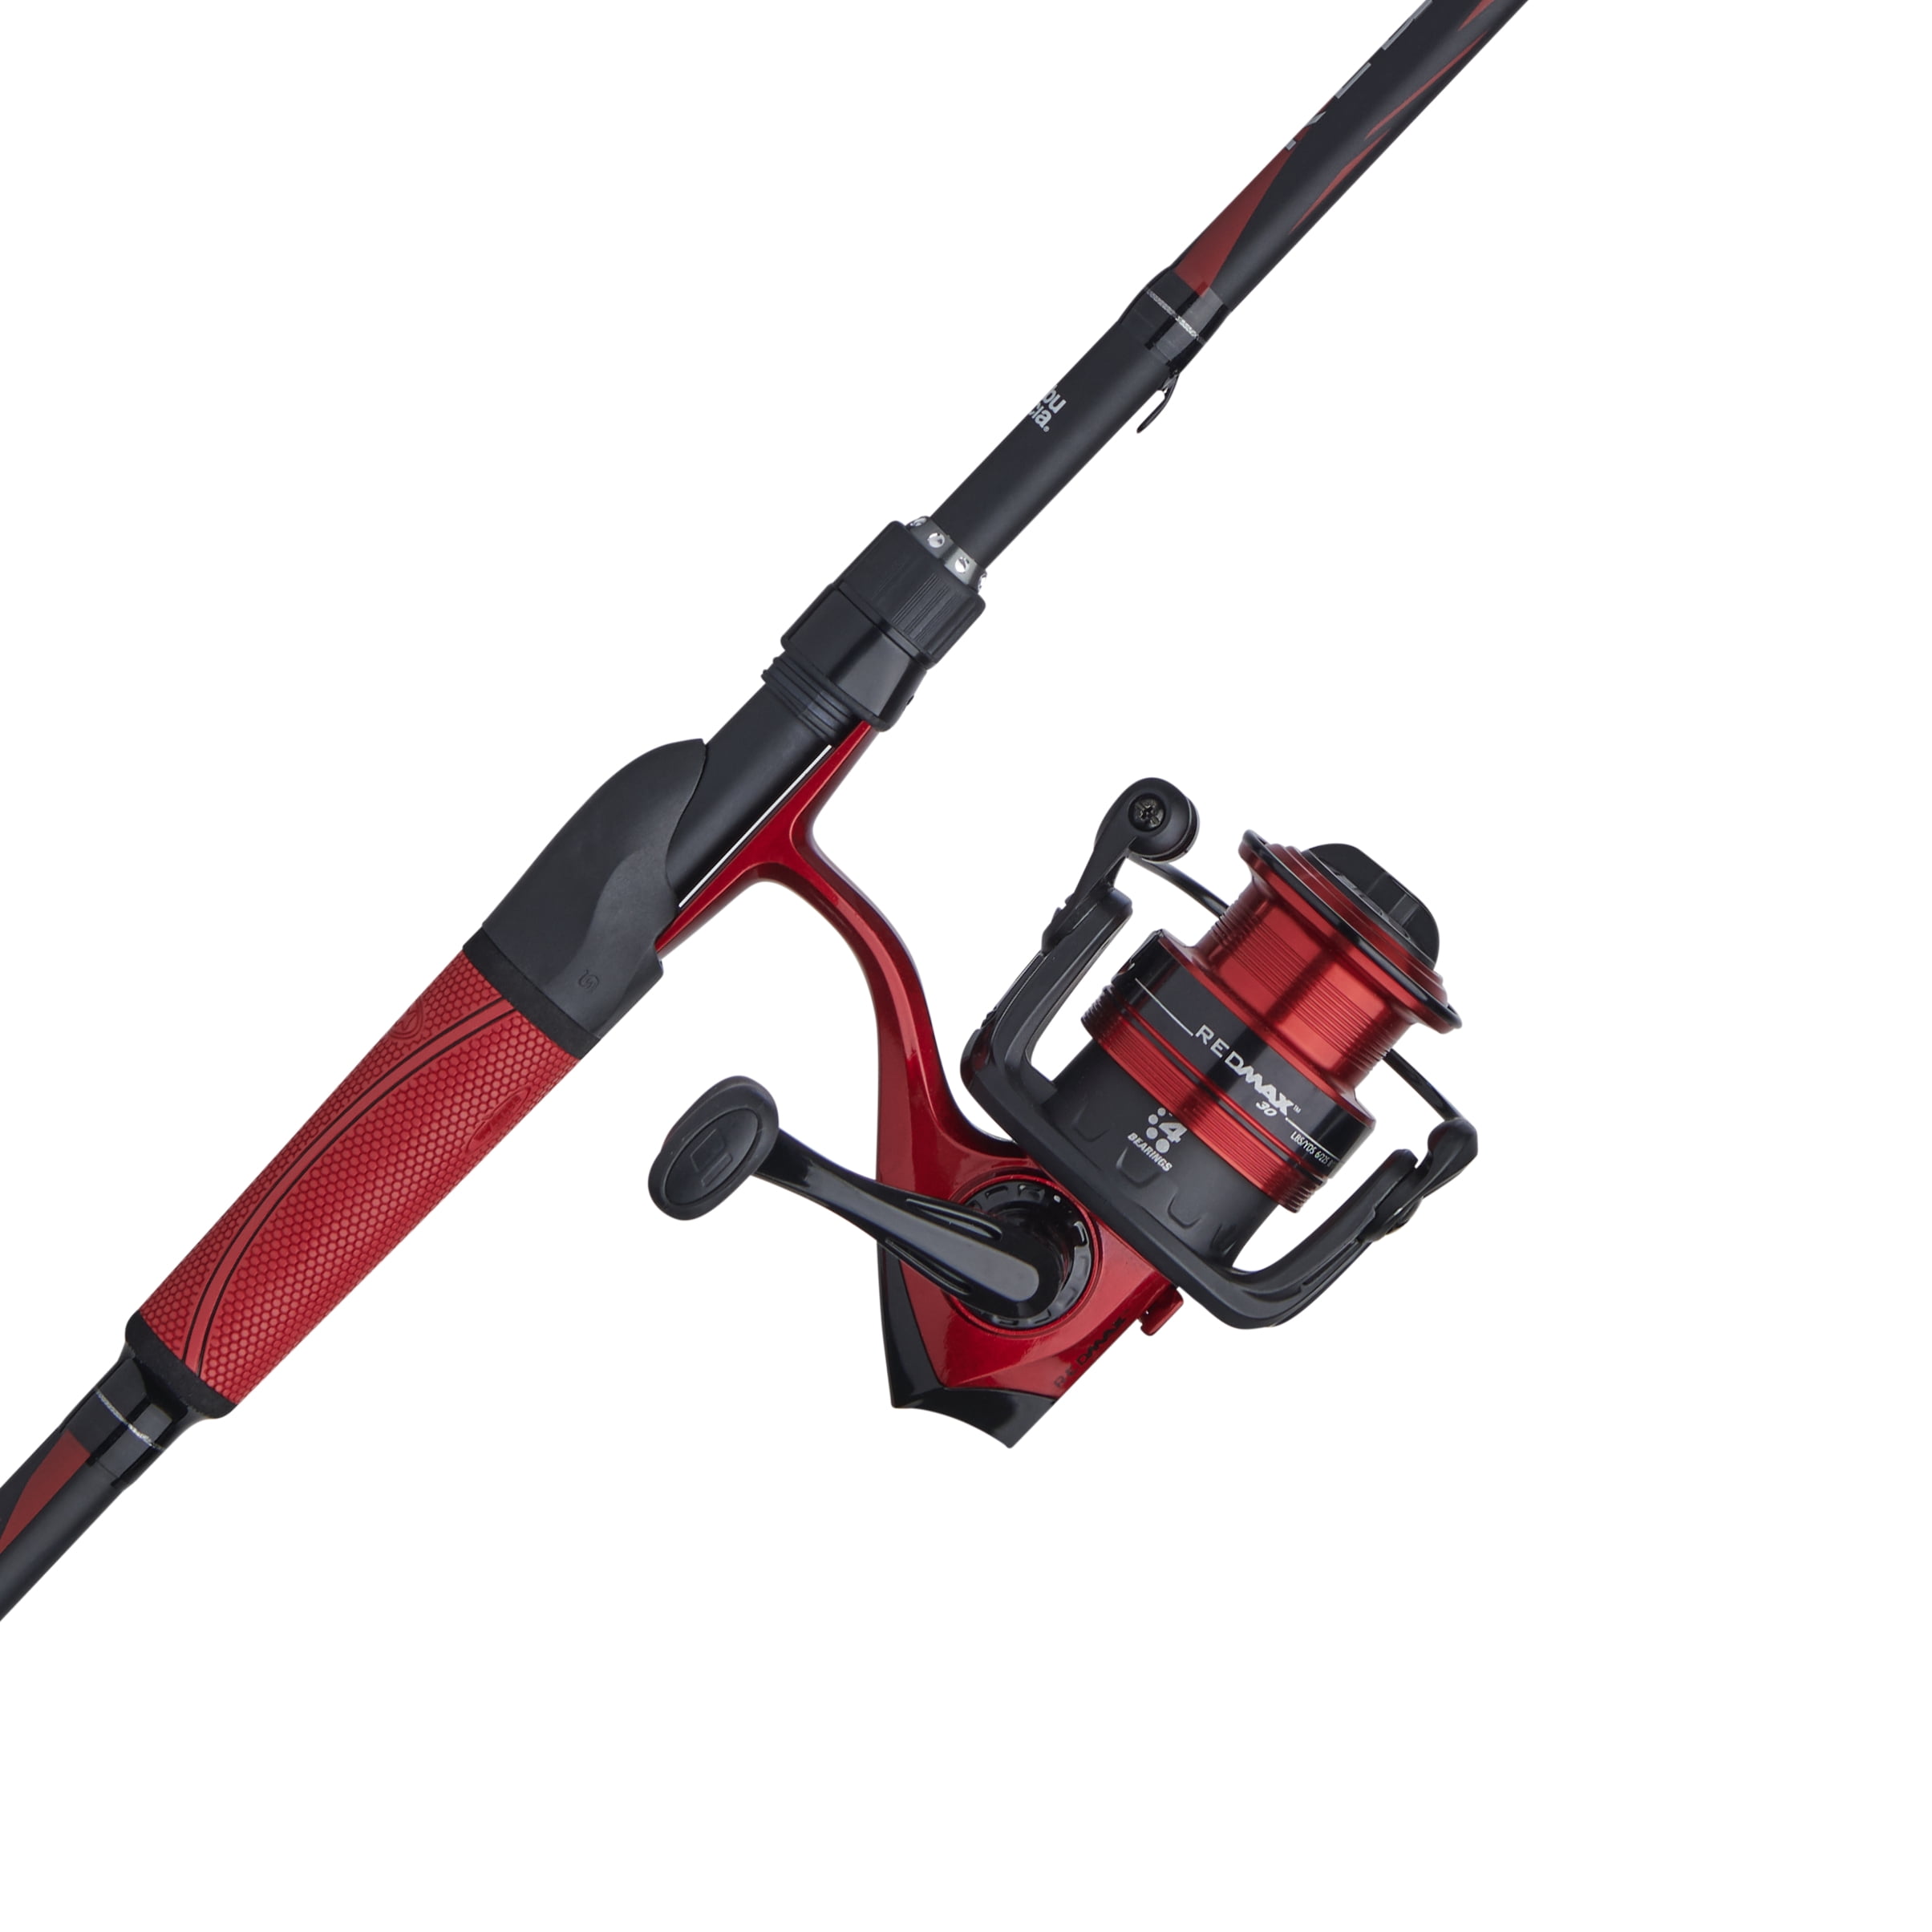 Abu Garcia Red Max 30 Spinning Reel - RDMAXSP30 for sale online